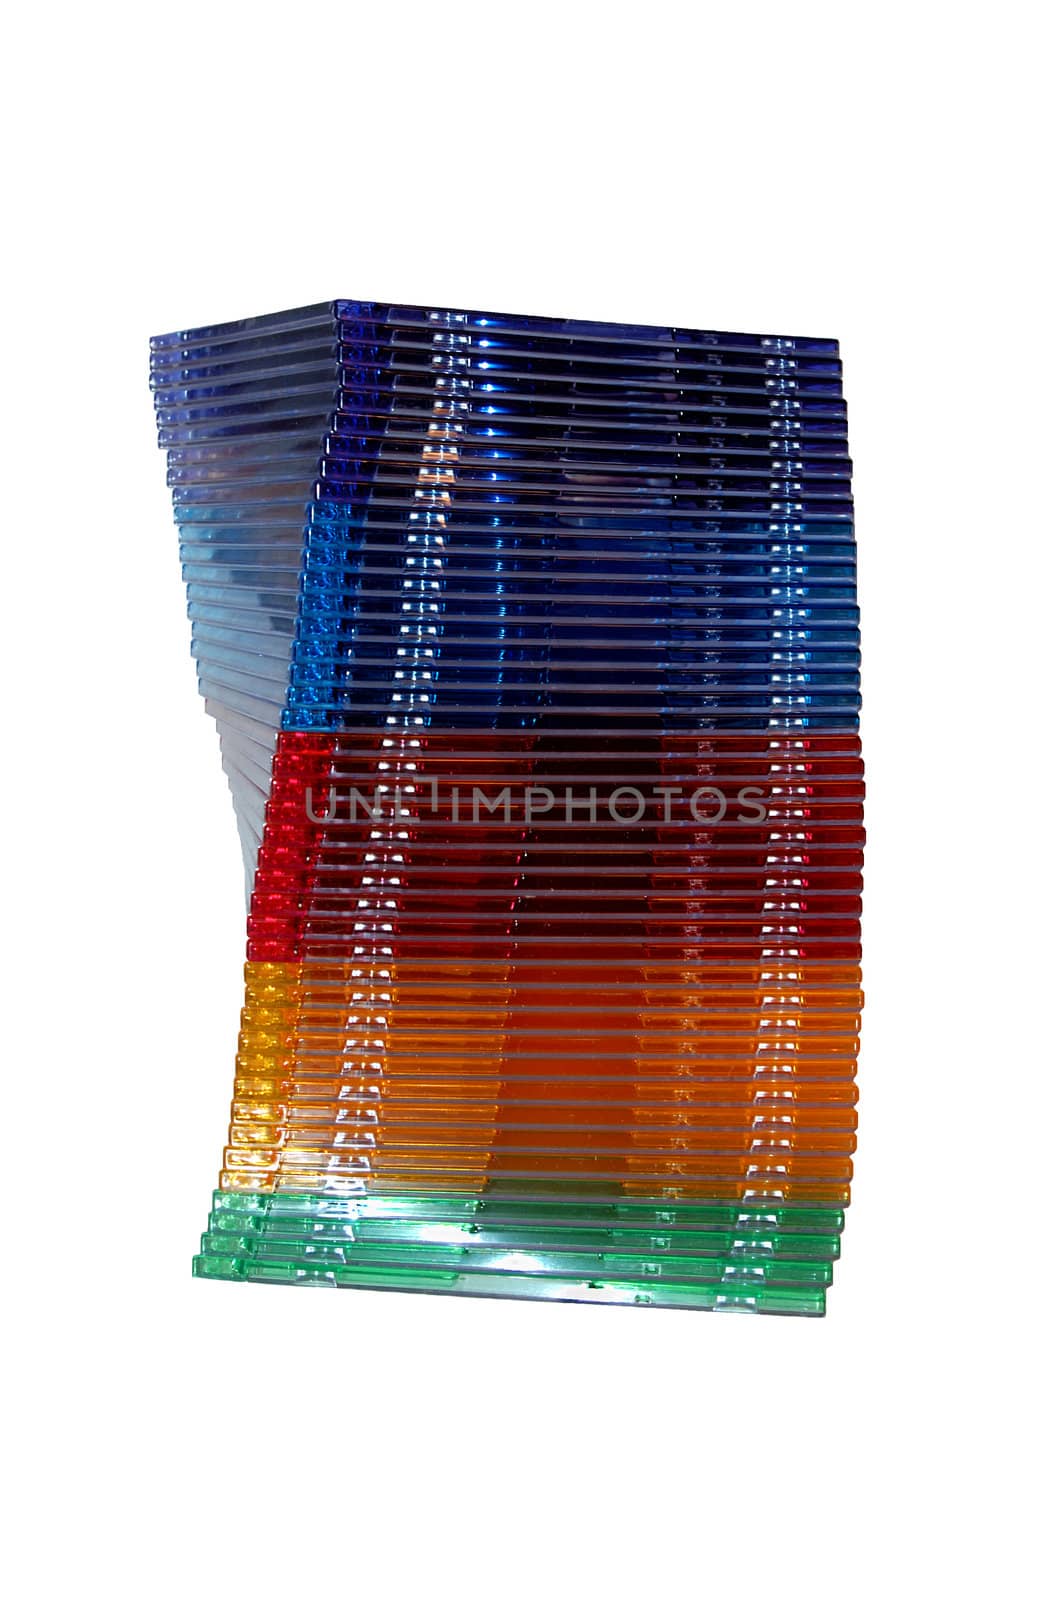 spiral stack of colorfull dvd and cd jewel cases